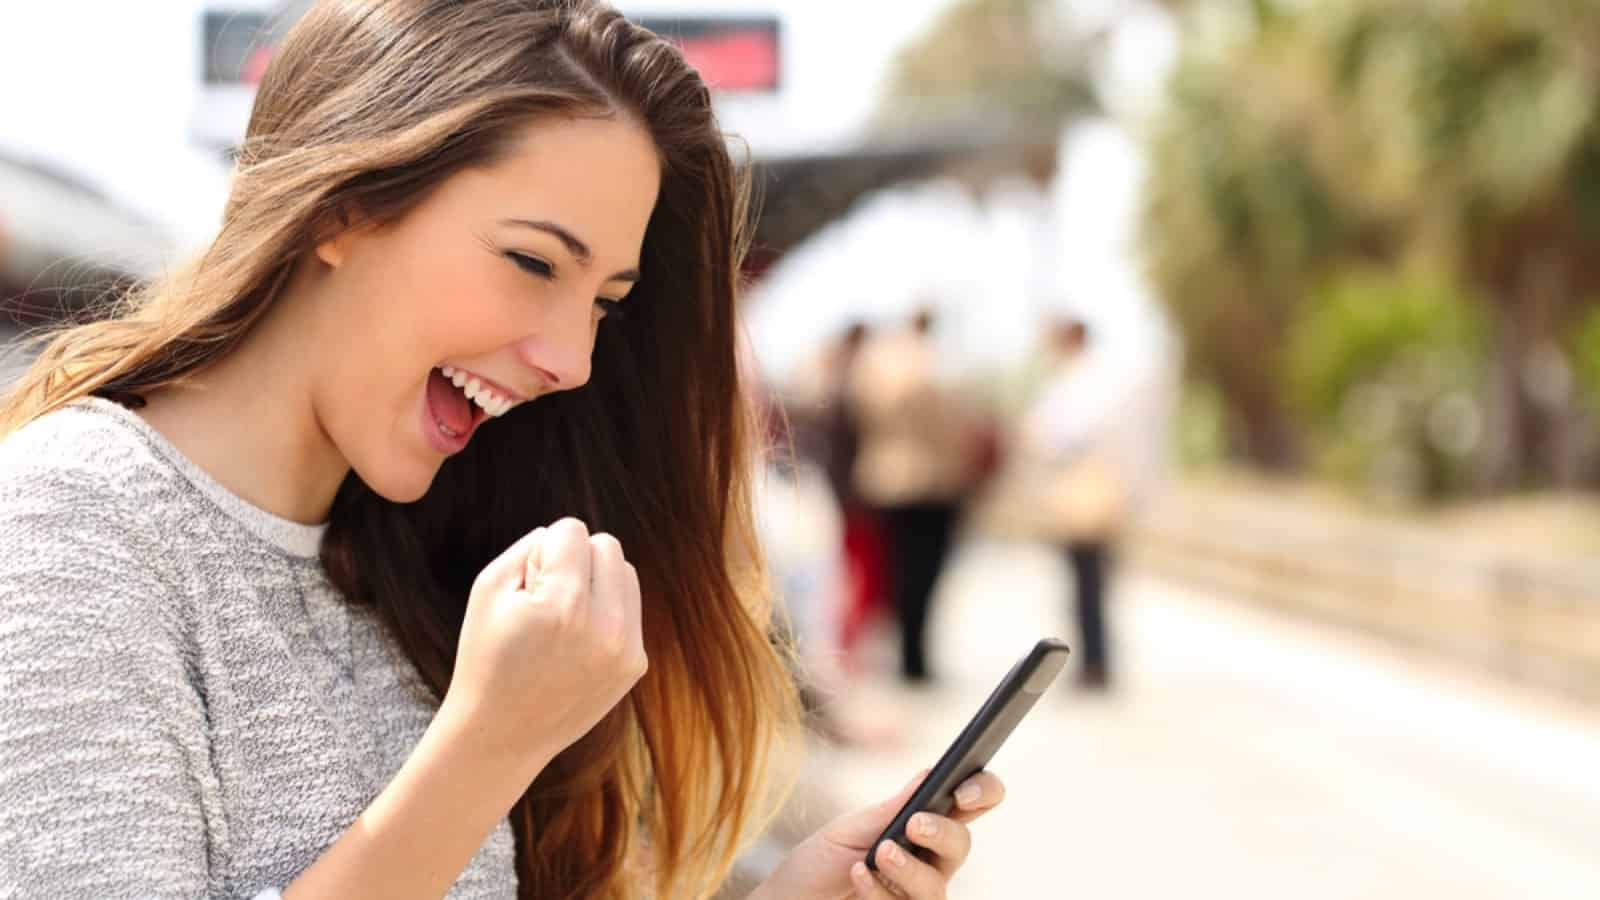 Woman excited with mobile